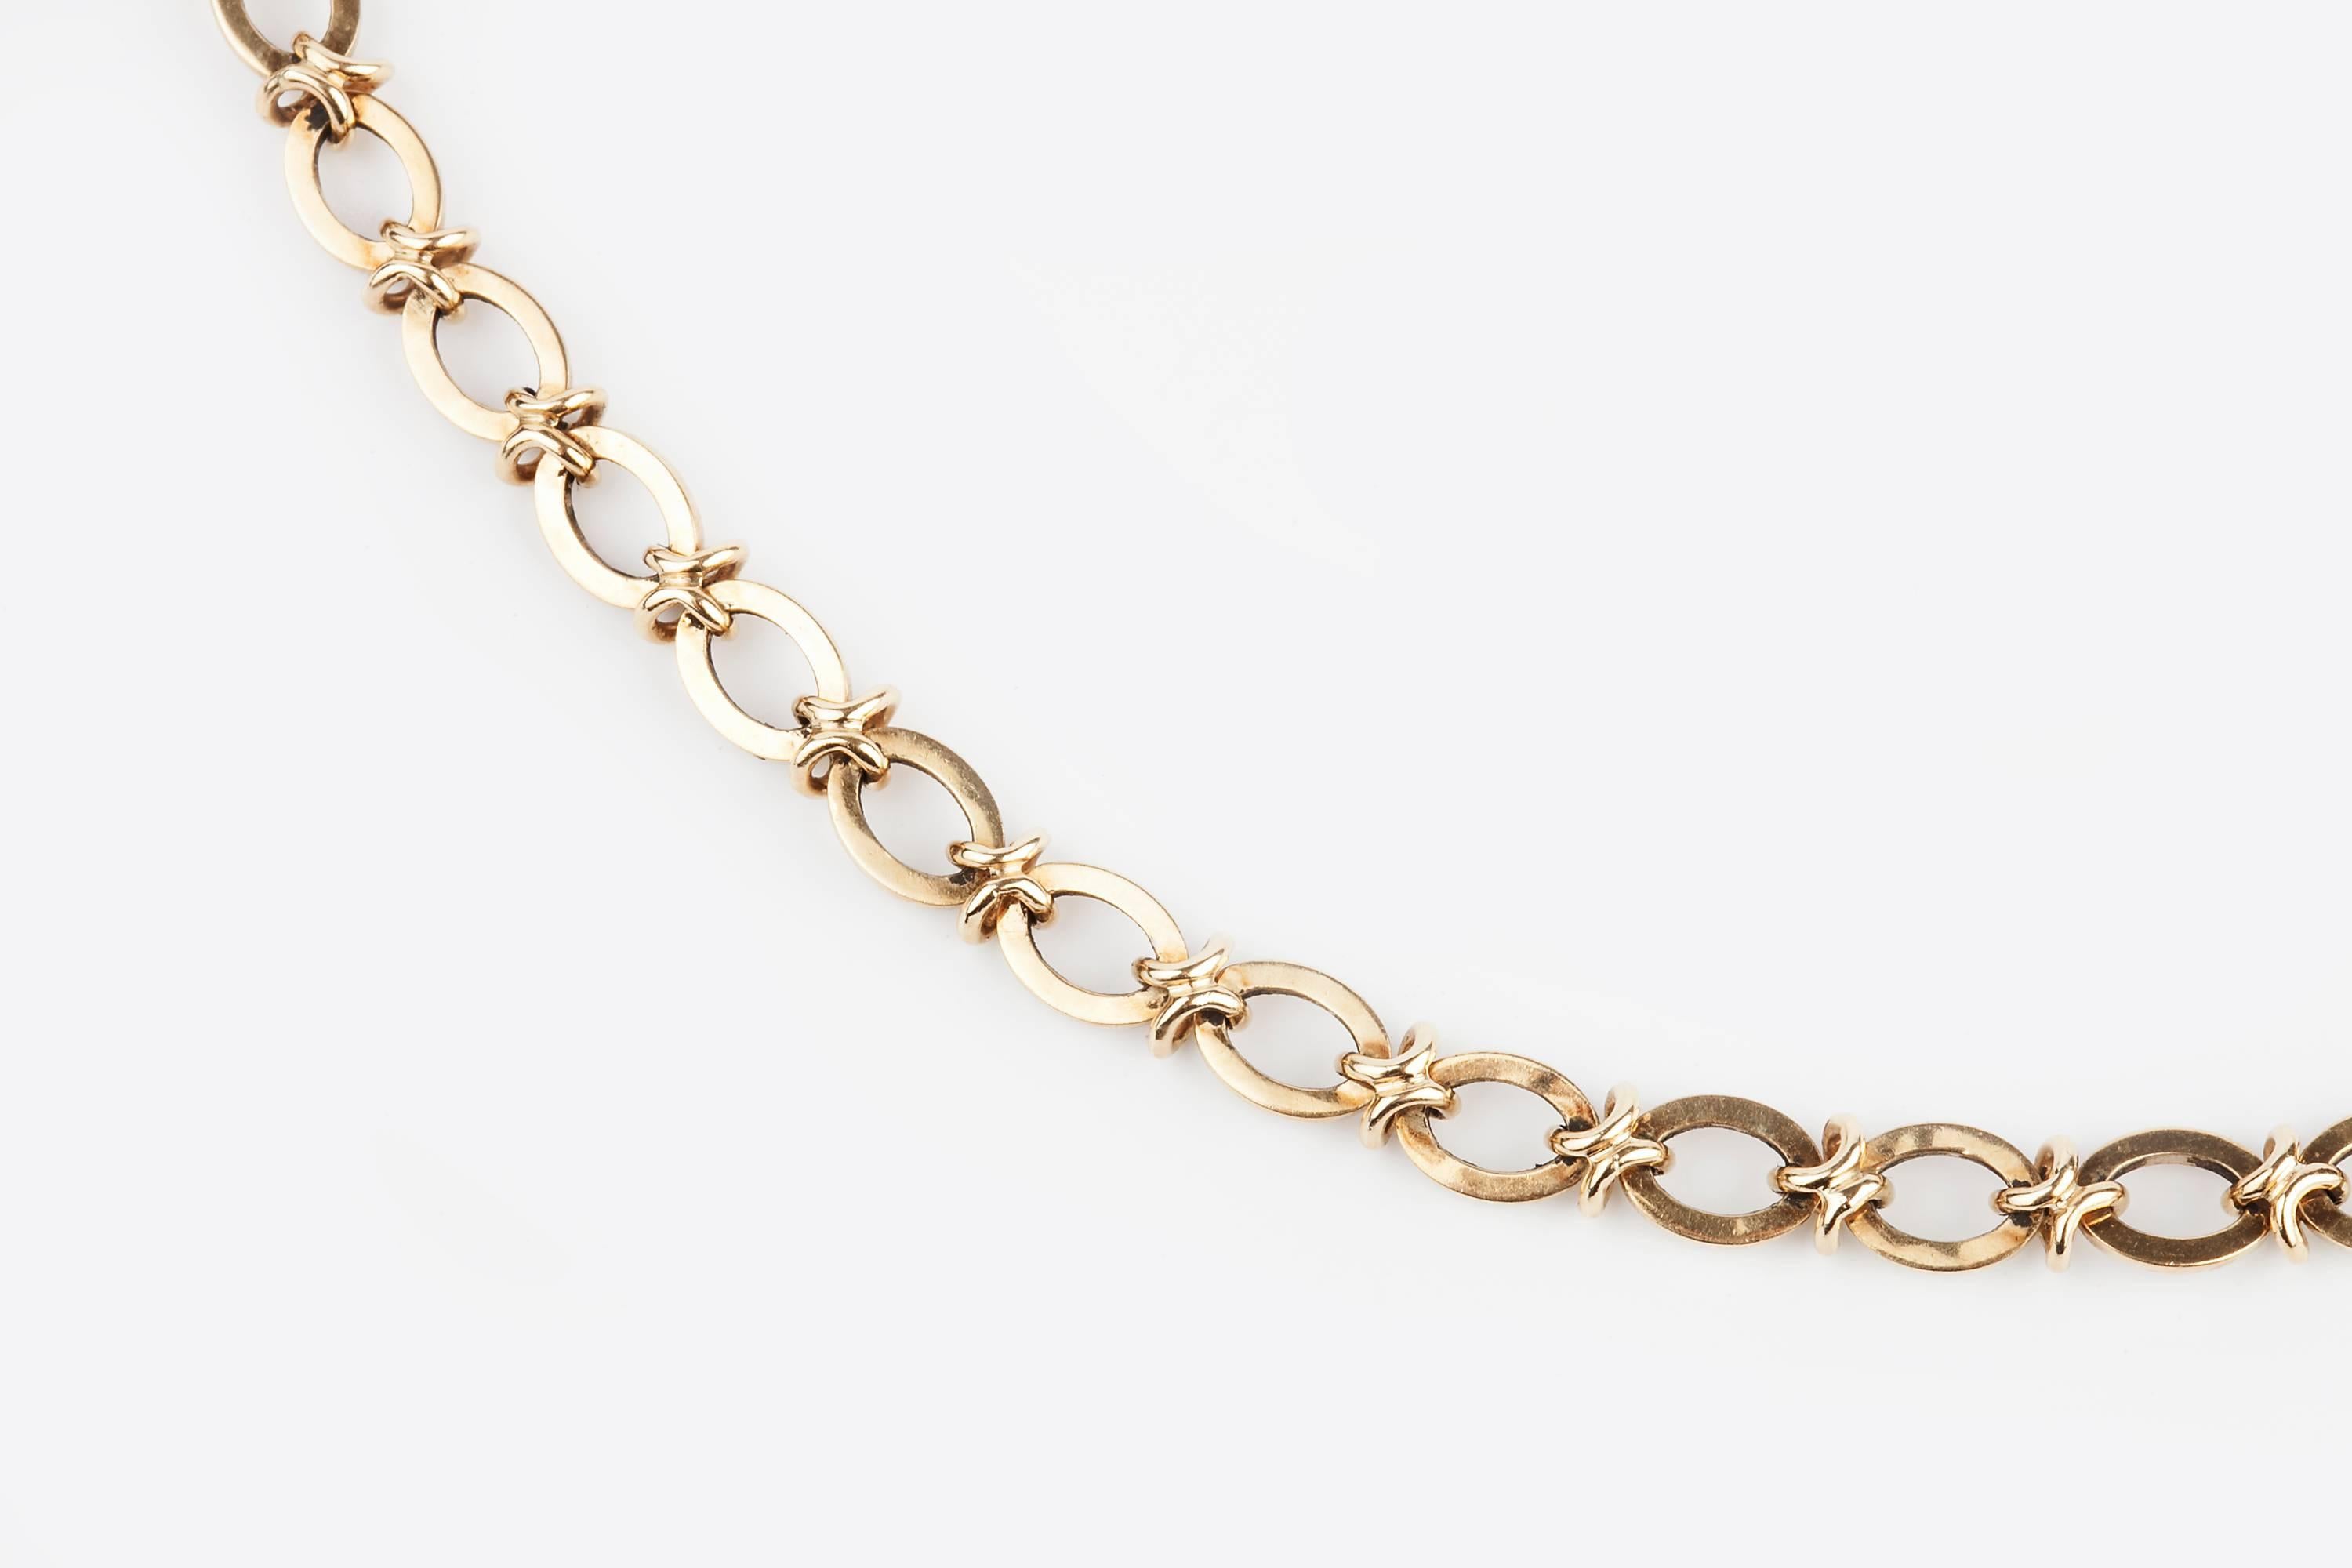 A 9ct gold chain necklace, by Cropp & Farr, composed of polished oval links with knot links between, hallmarked for London, 1994 and stamped ‘C&F’, necklace length 64.5cm, it is a wonderful necklace which would looks great as a modern longuard.